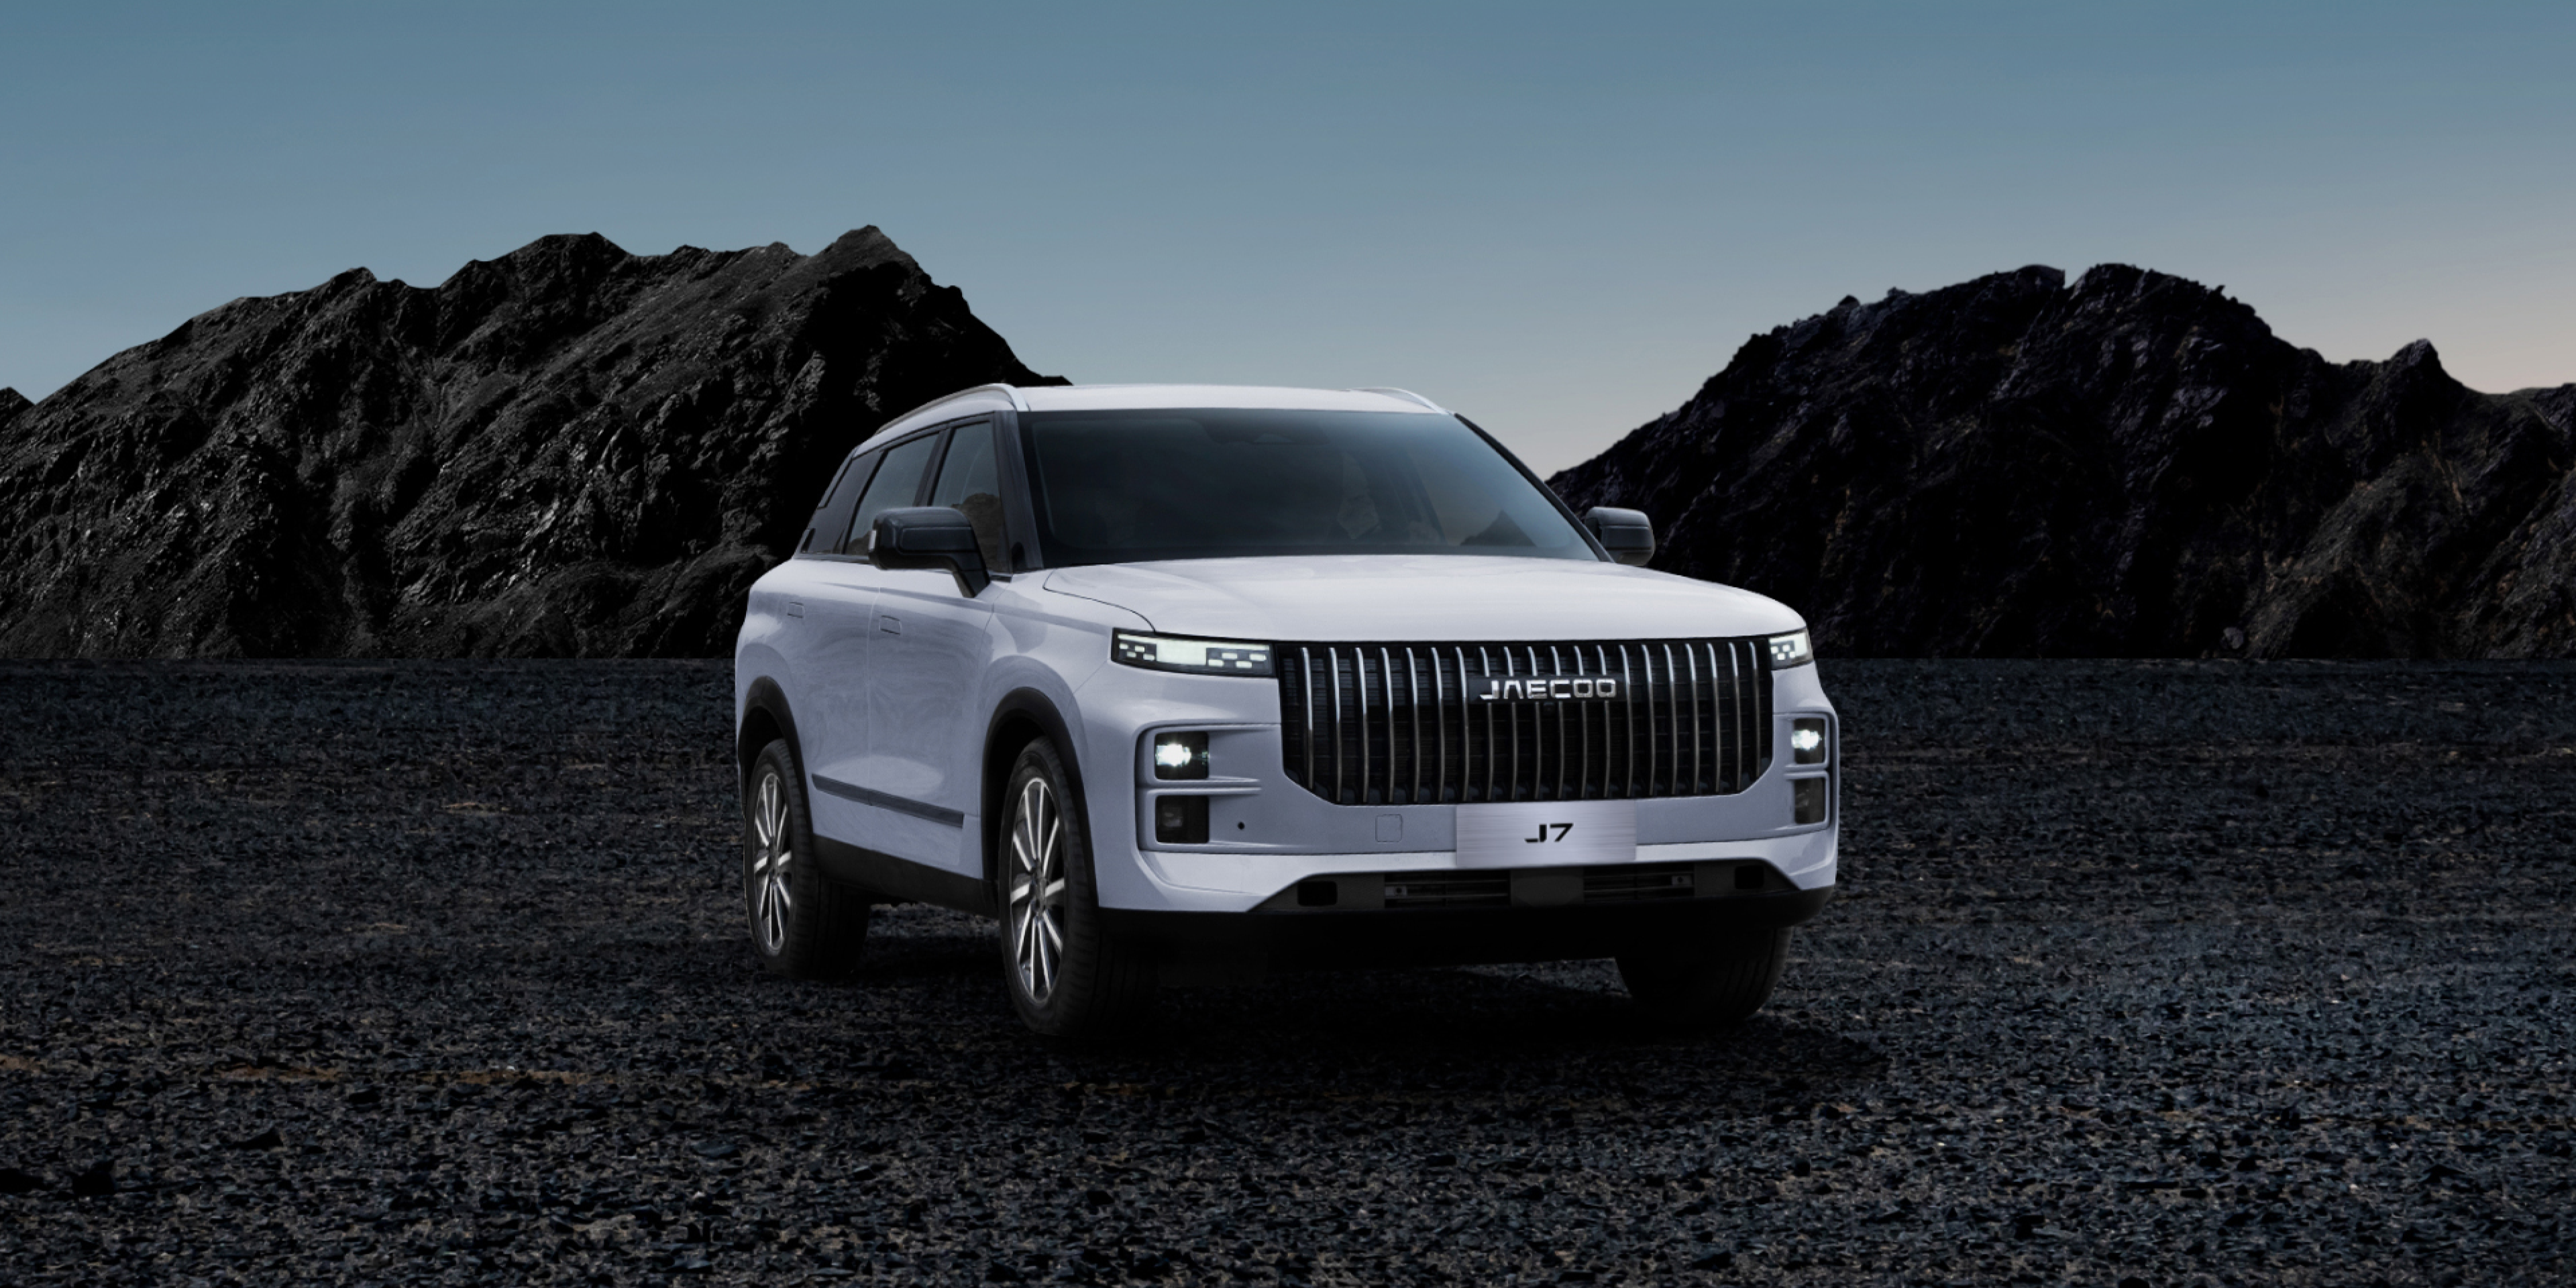 A new premium off-road SUV, the white JAECOO, is parked on a rocky terrain with dark mountains in the background under a cloudy sky, showcasing its JAECOO premium off-road performance.